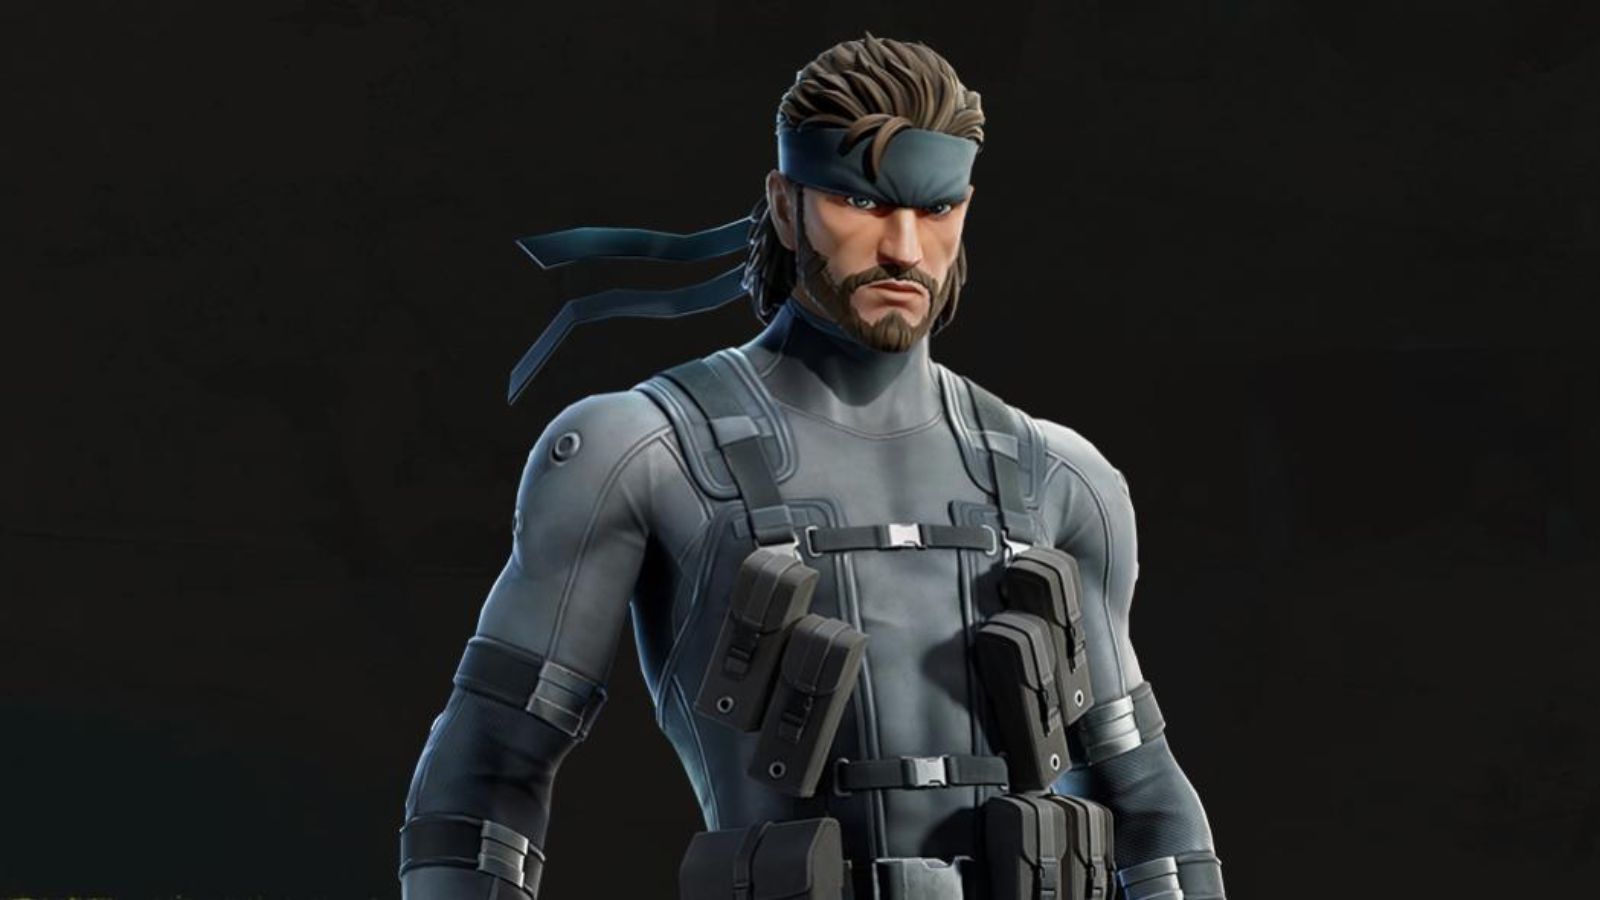 How To Get Solid Snake in Fortnite